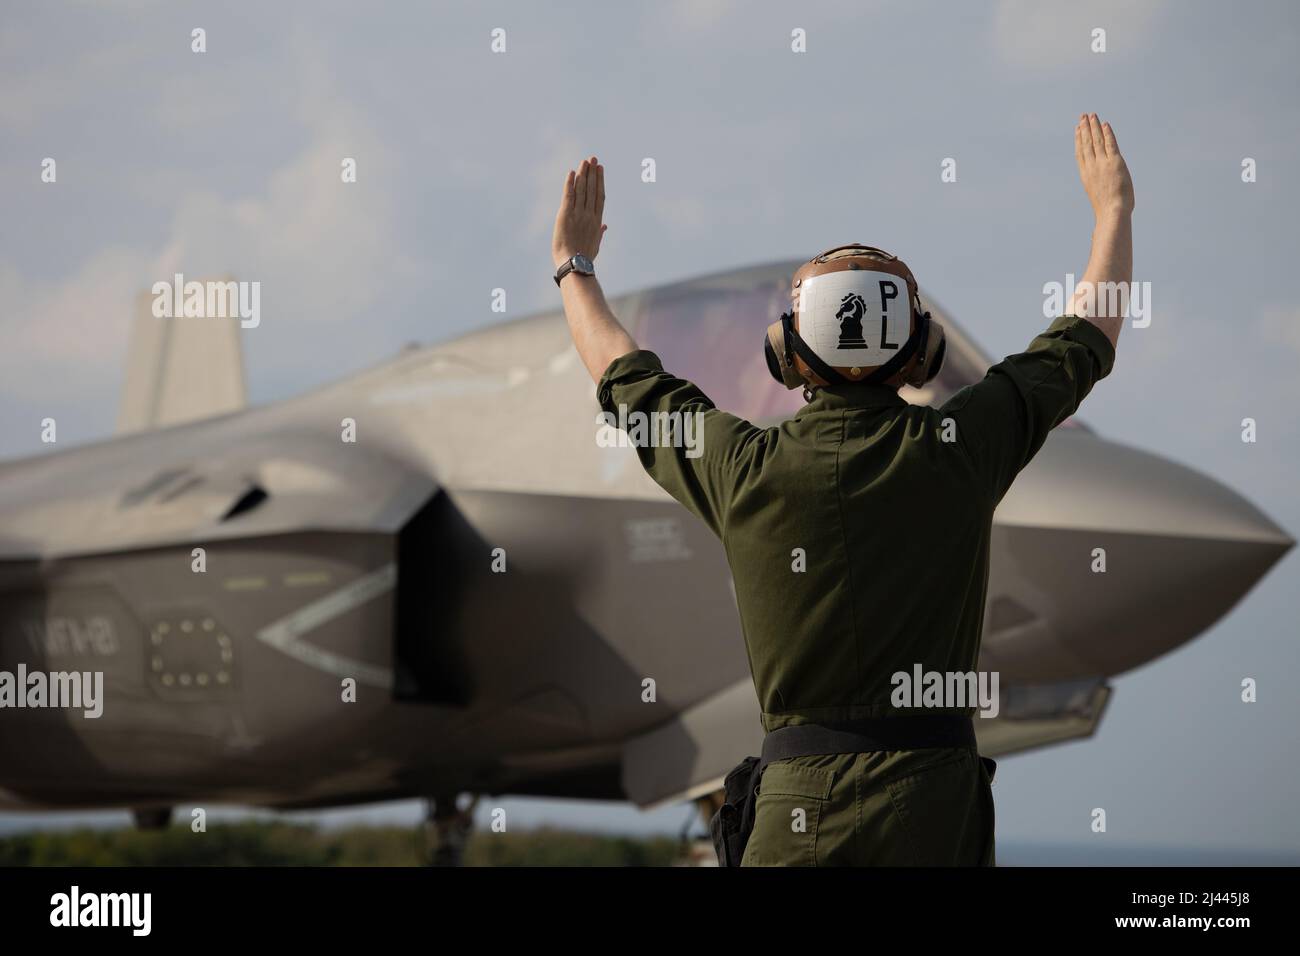 U.S. Marine Corps Sgt. Zachary Powell, a fixed-wing aircraft mechanic assigned to Marine Fighter Attack Squadron 121 (VMFA-121) guides an F-35B Lightning II aircraft during field carrier landing practices (FCLP) at Ie Shima Island, Okinawa, Japan, April 7, 2022. The FCLP trains the F-35B pilots for proficiency and mission readiness when deployed aboard aircraft carriers. (U.S. Marine Corps photo by Lance Cpl. Kyle Chan) Stock Photo